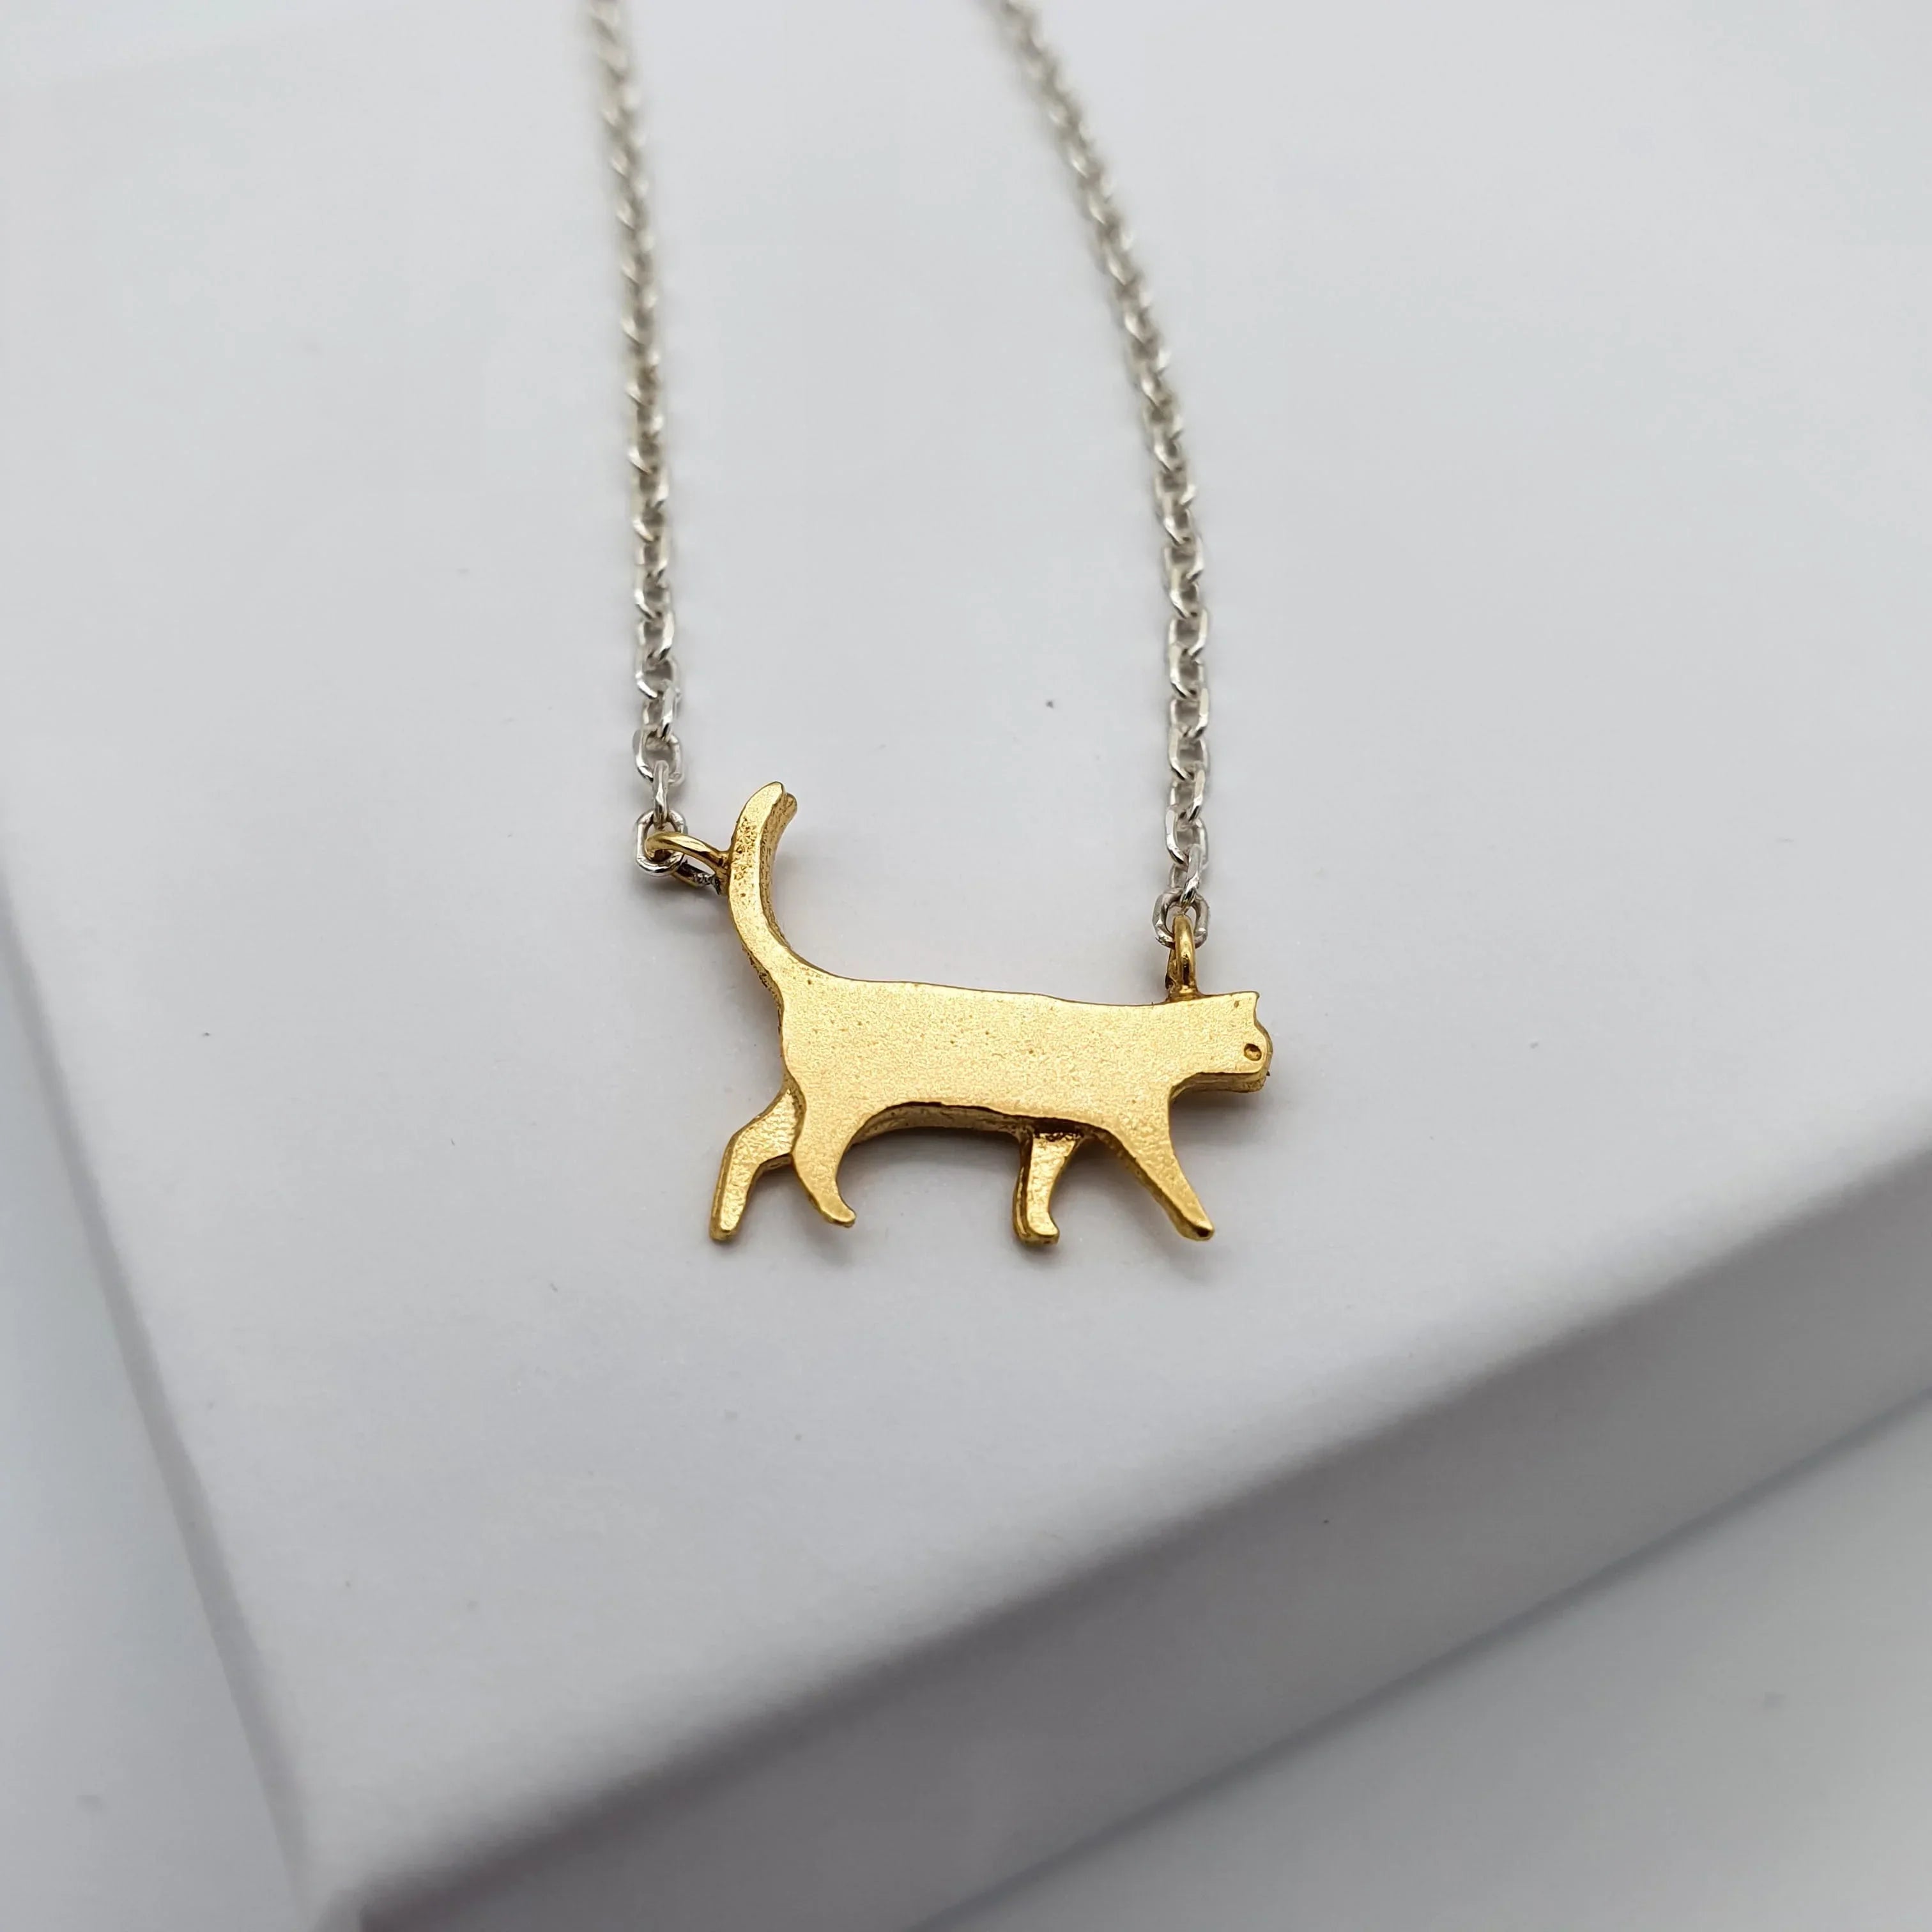 Necklace cat constellation gold | THOMAS SABO